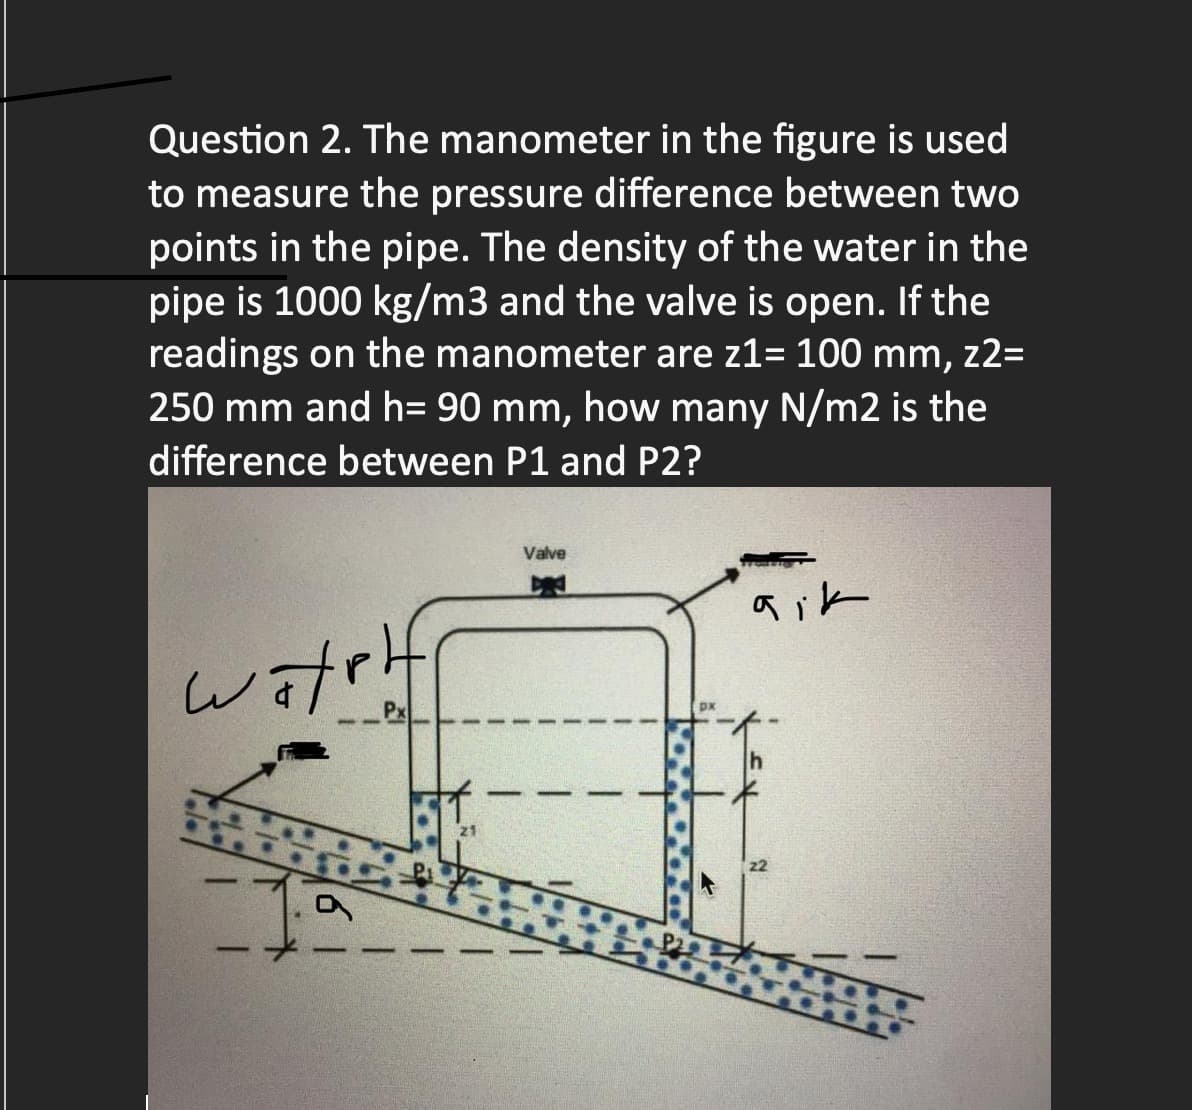 Question 2. The manometer in the figure is used
to measure the pressure difference between two
points in the pipe. The density of the water in the
pipe is 1000 kg/m3 and the valve is open. If the
readings on the manometer are z1= 100 mm, z2=
250 mm and h= 90 mm, how many N/m2 is the
difference between P1 and P2?
watplf
Valve
aik